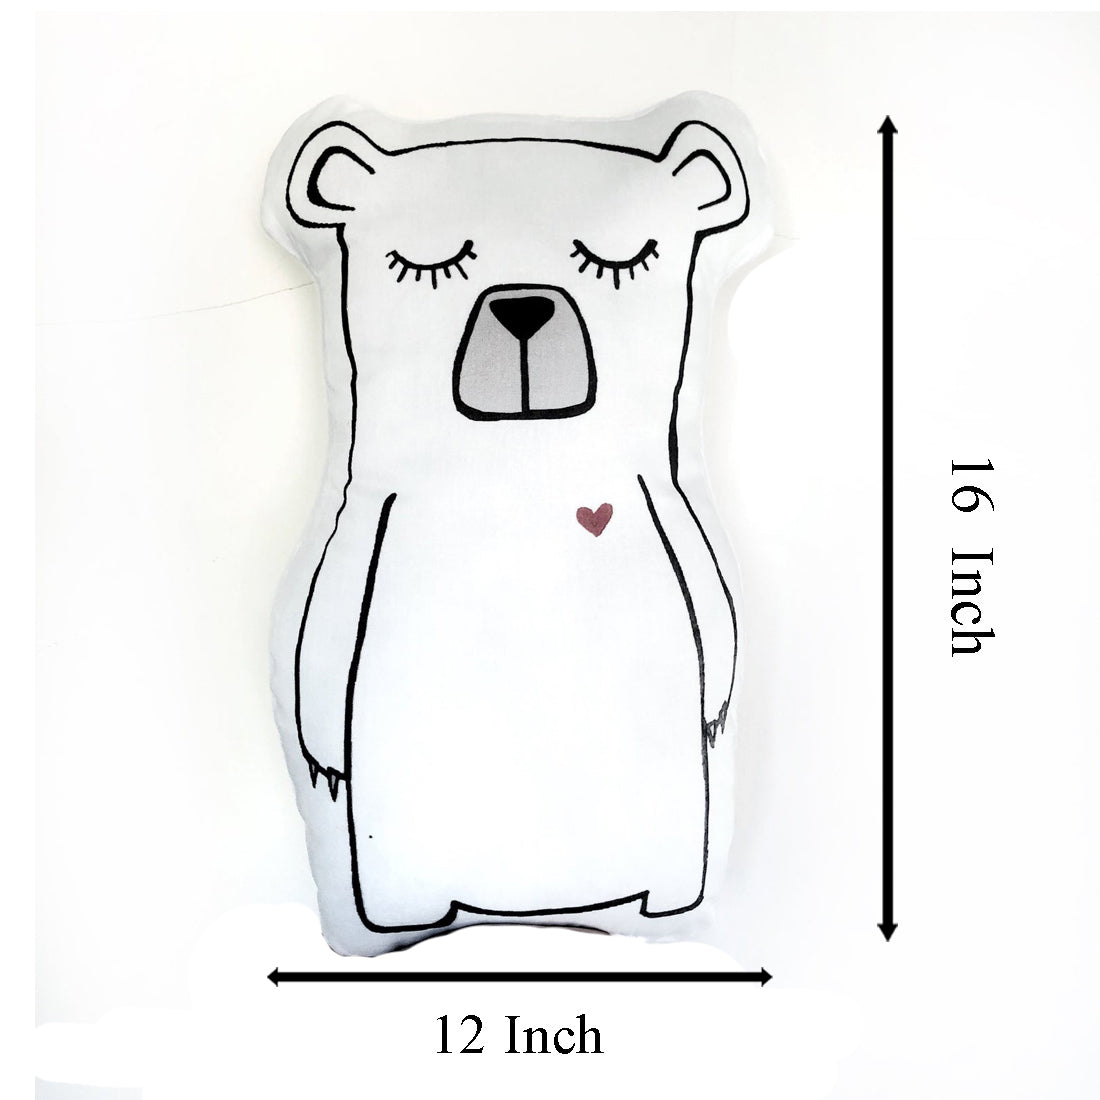 A white bear pillow with a heart drawn on it, perfect for cuddling and adding a touch of love to any space.